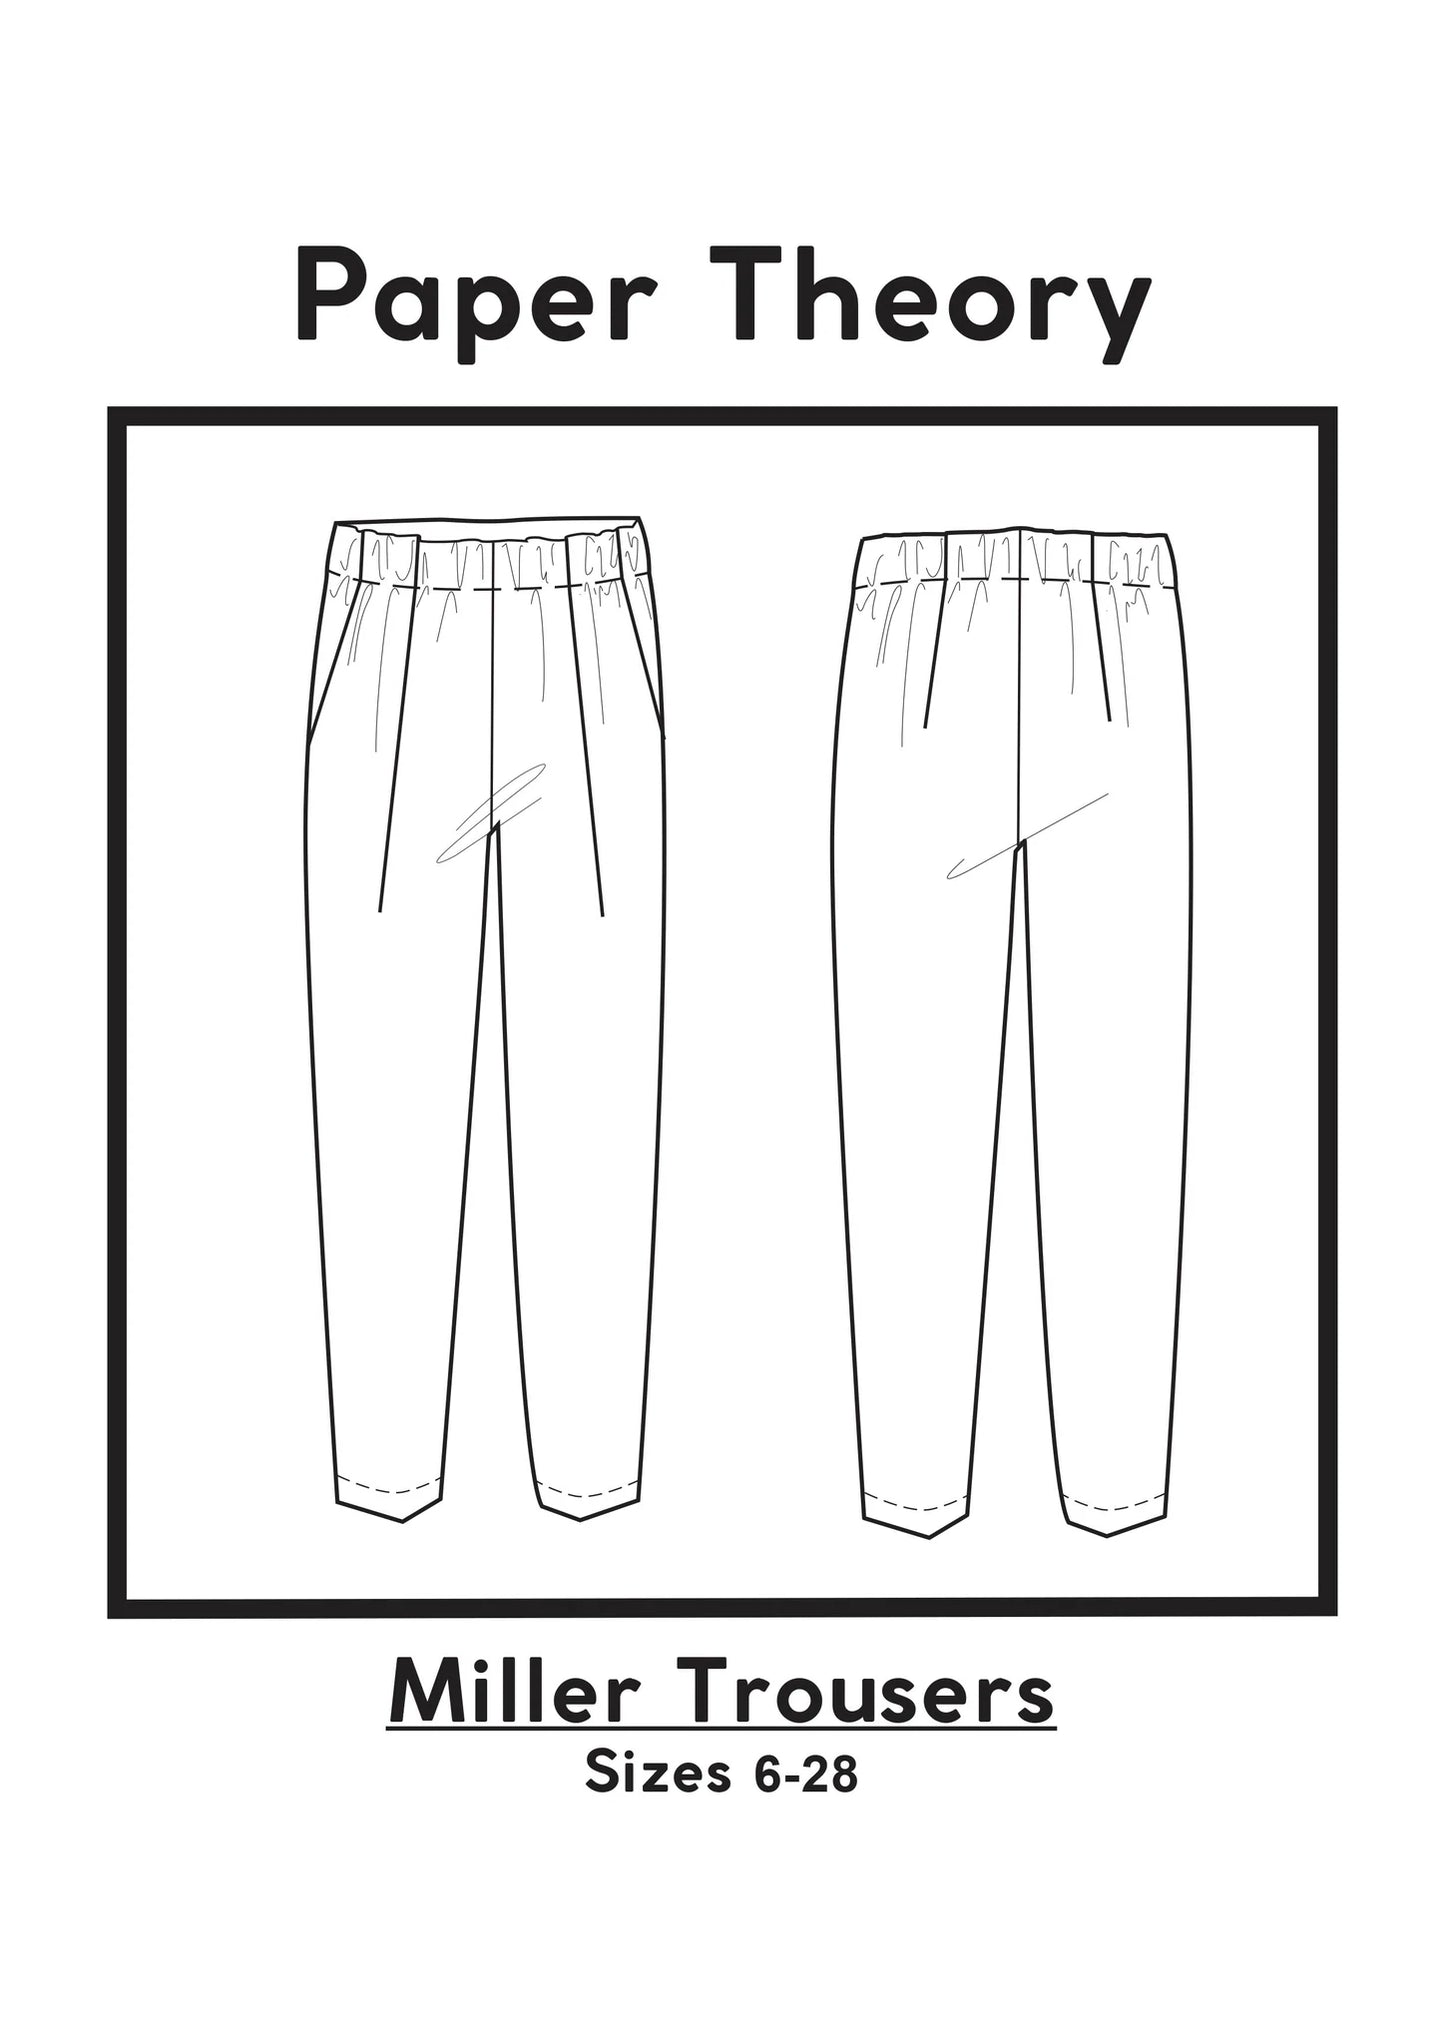 Miller Trouser - Paper pattern - Paper Theory